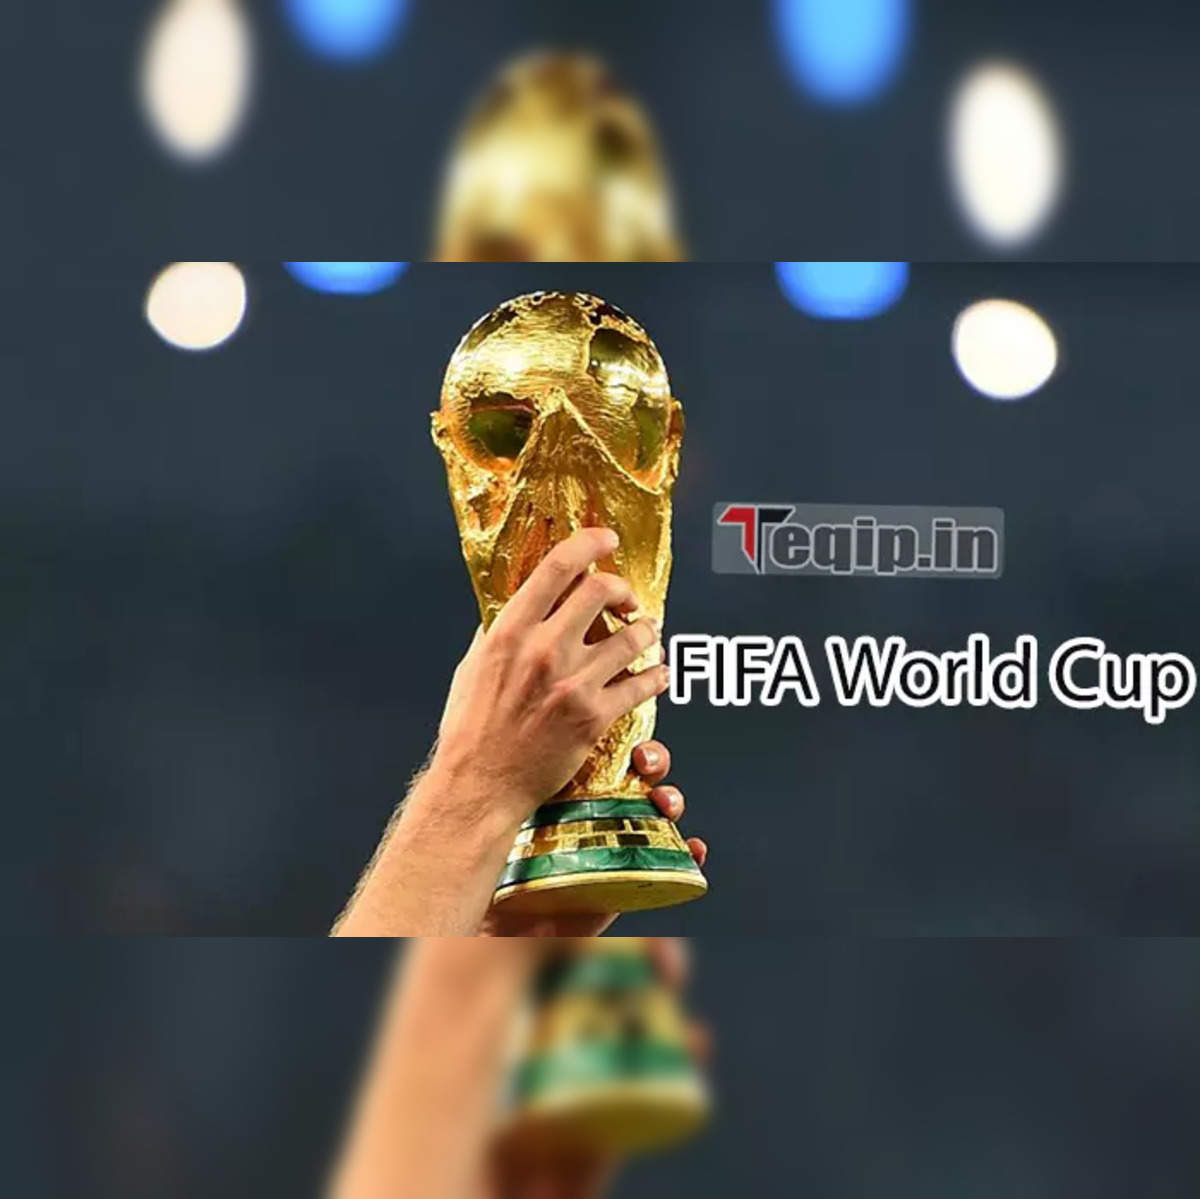 Free Fifa World Cup calendar: Here are the dates for matches, giant clashes  - News